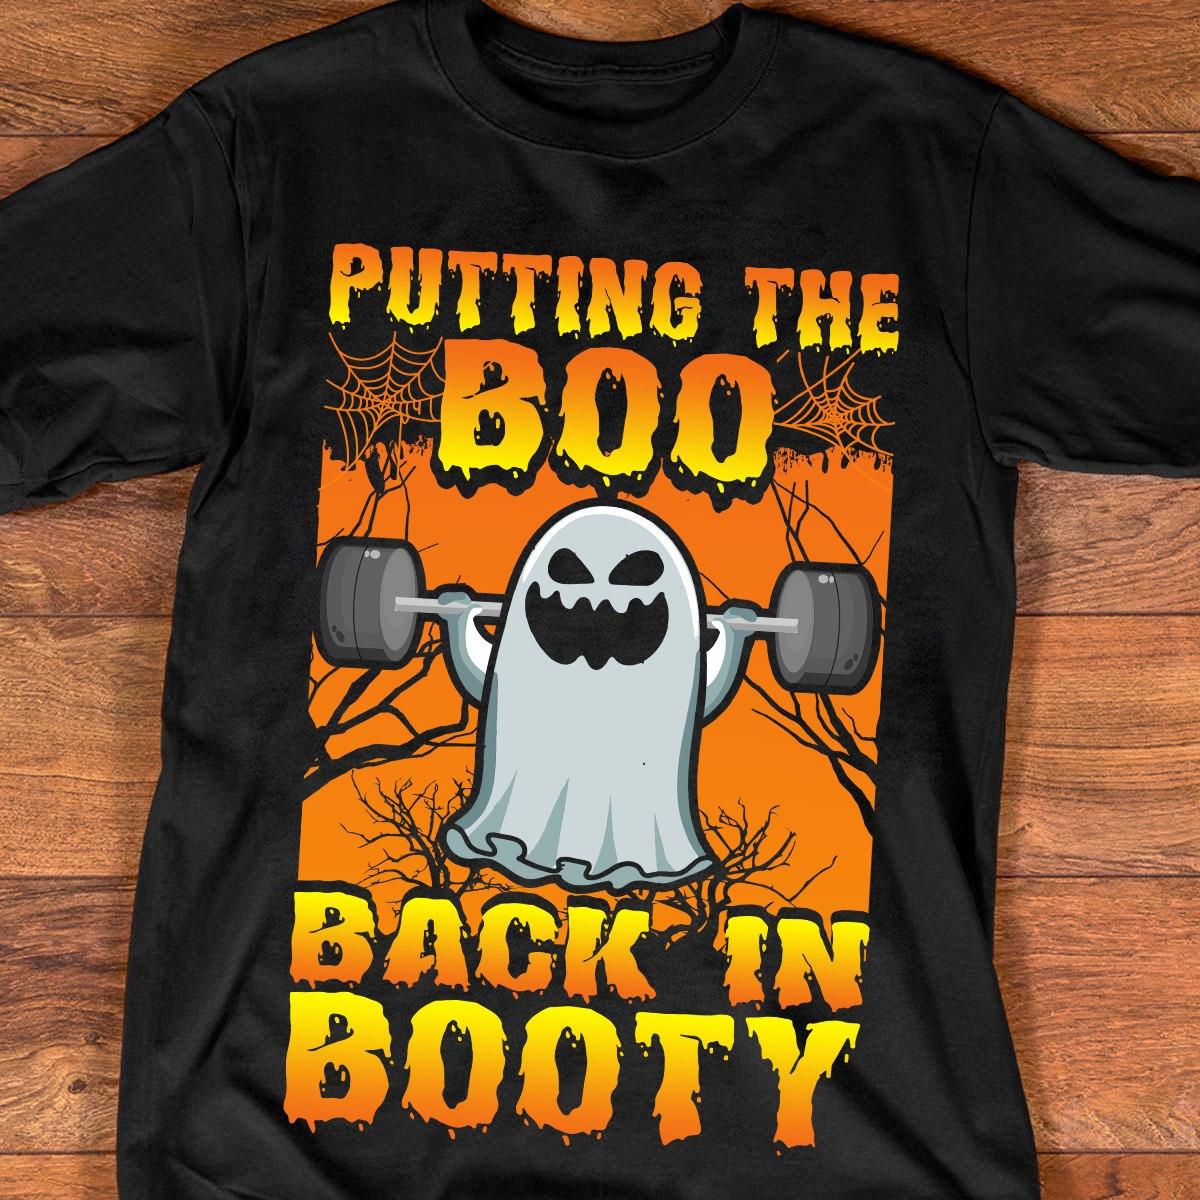 Putting the boo, back in booty - Halloween white boo lifting, love lifting heavy iron